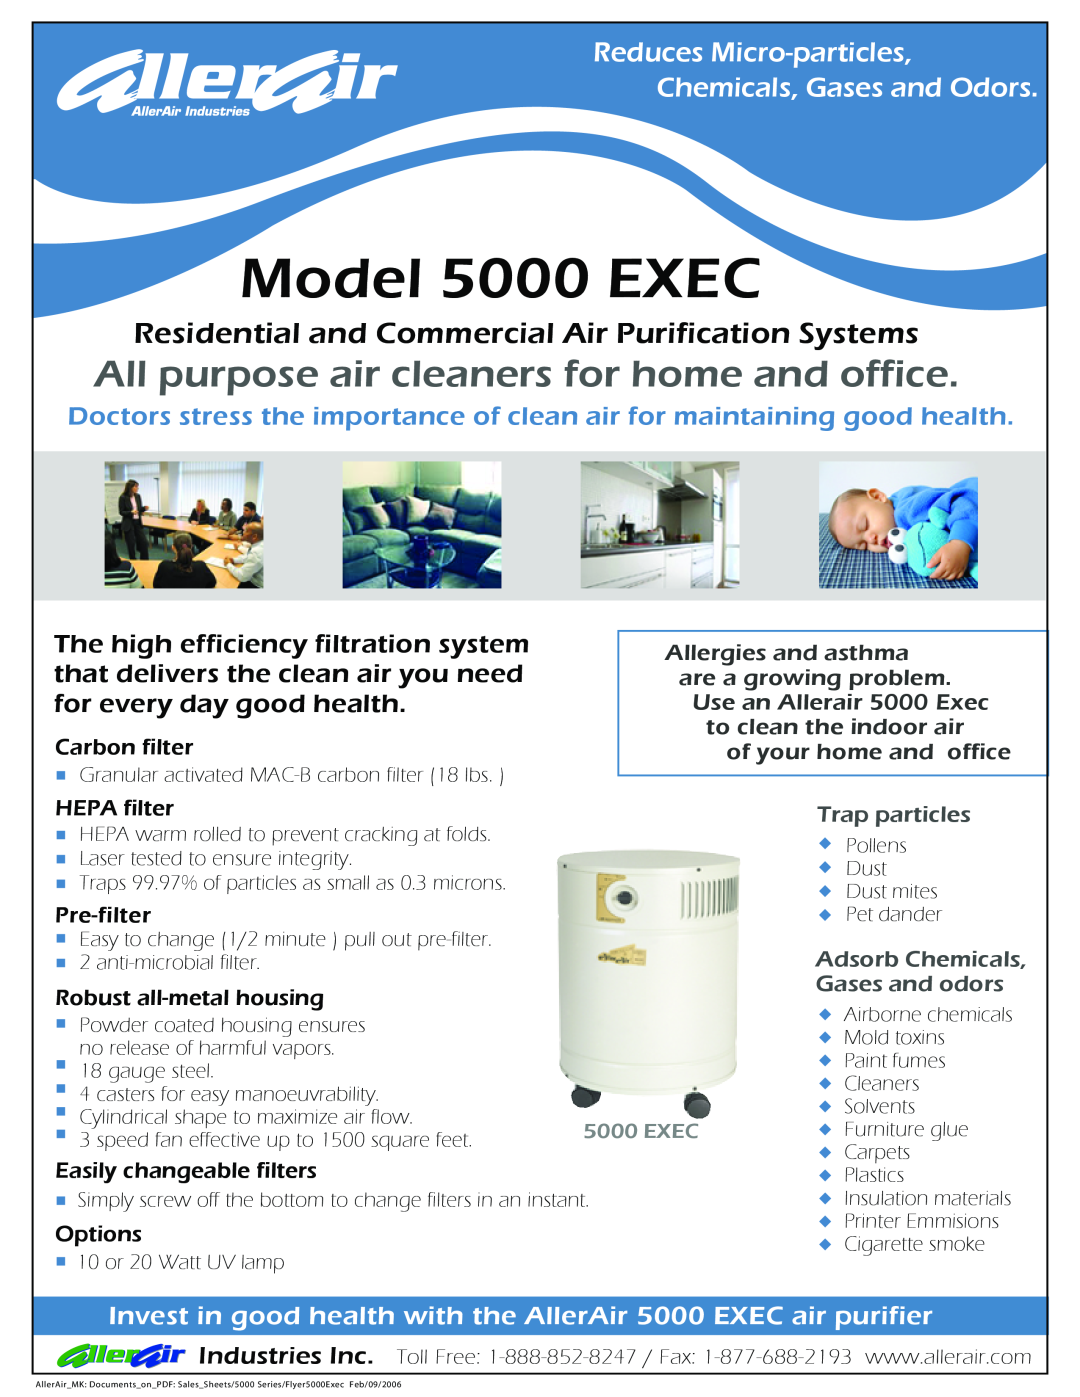 AllerAir 5000 EXEC manual Carbon filter, HEPA filter, Pre-filter, Robust all-metalhousing, Easily changeable filters, Exec 